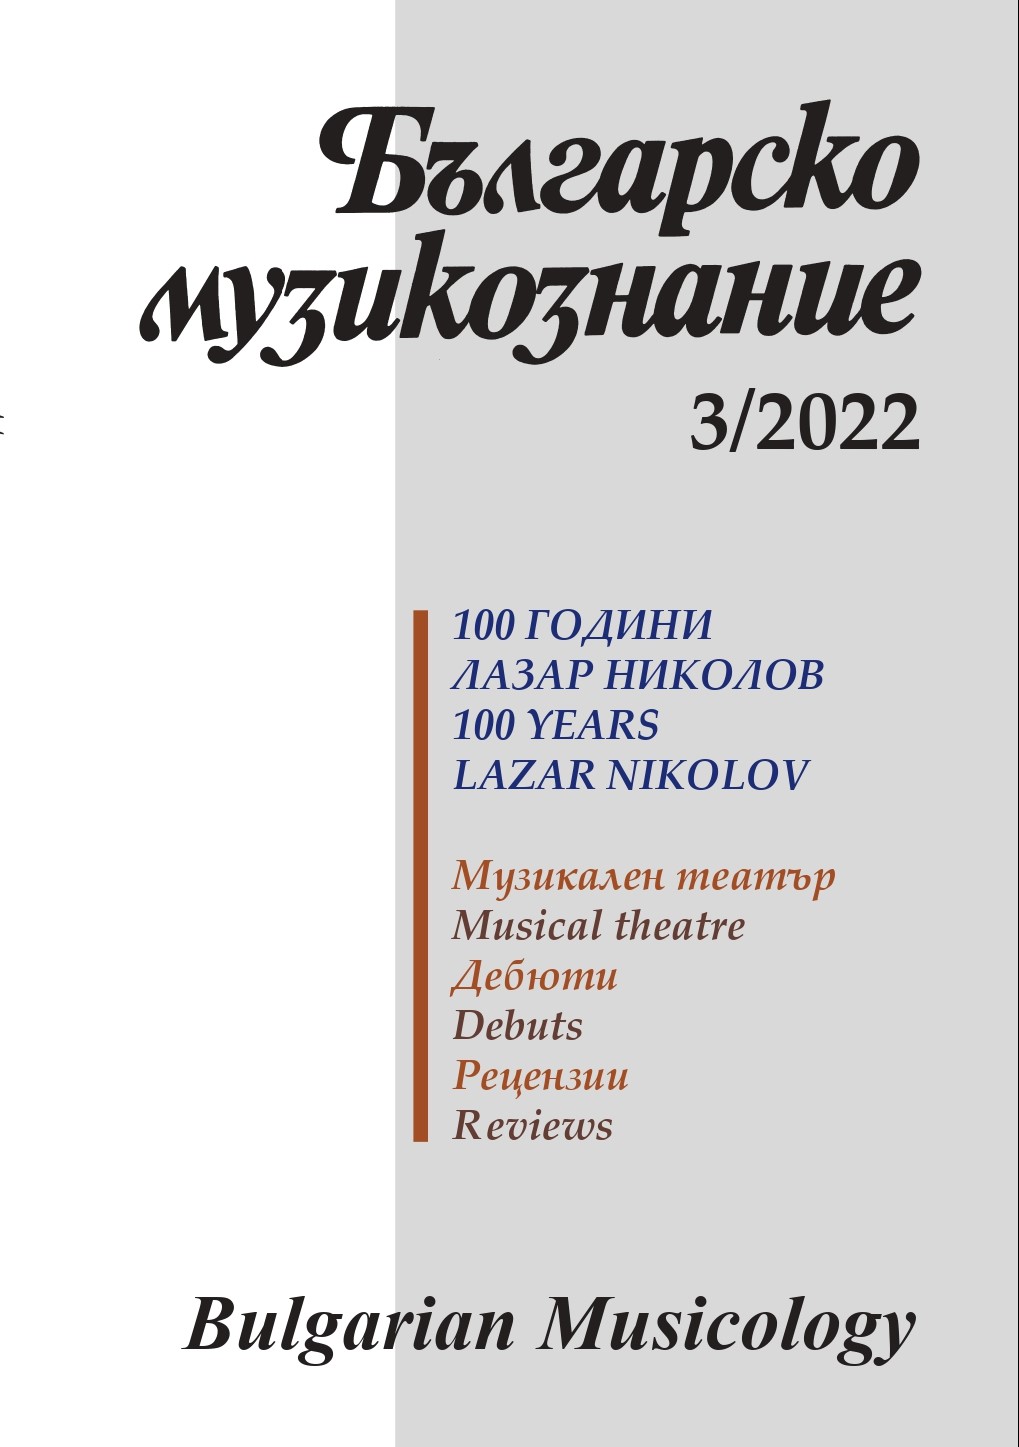 Existential Clashes and Memory Horizons for Bulgarian Modernism: Fragments from Lazar Nikolov’s Talk on Dimitar Nenov, Lubomir Pipkov, and Konstantin Iliev Cover Image